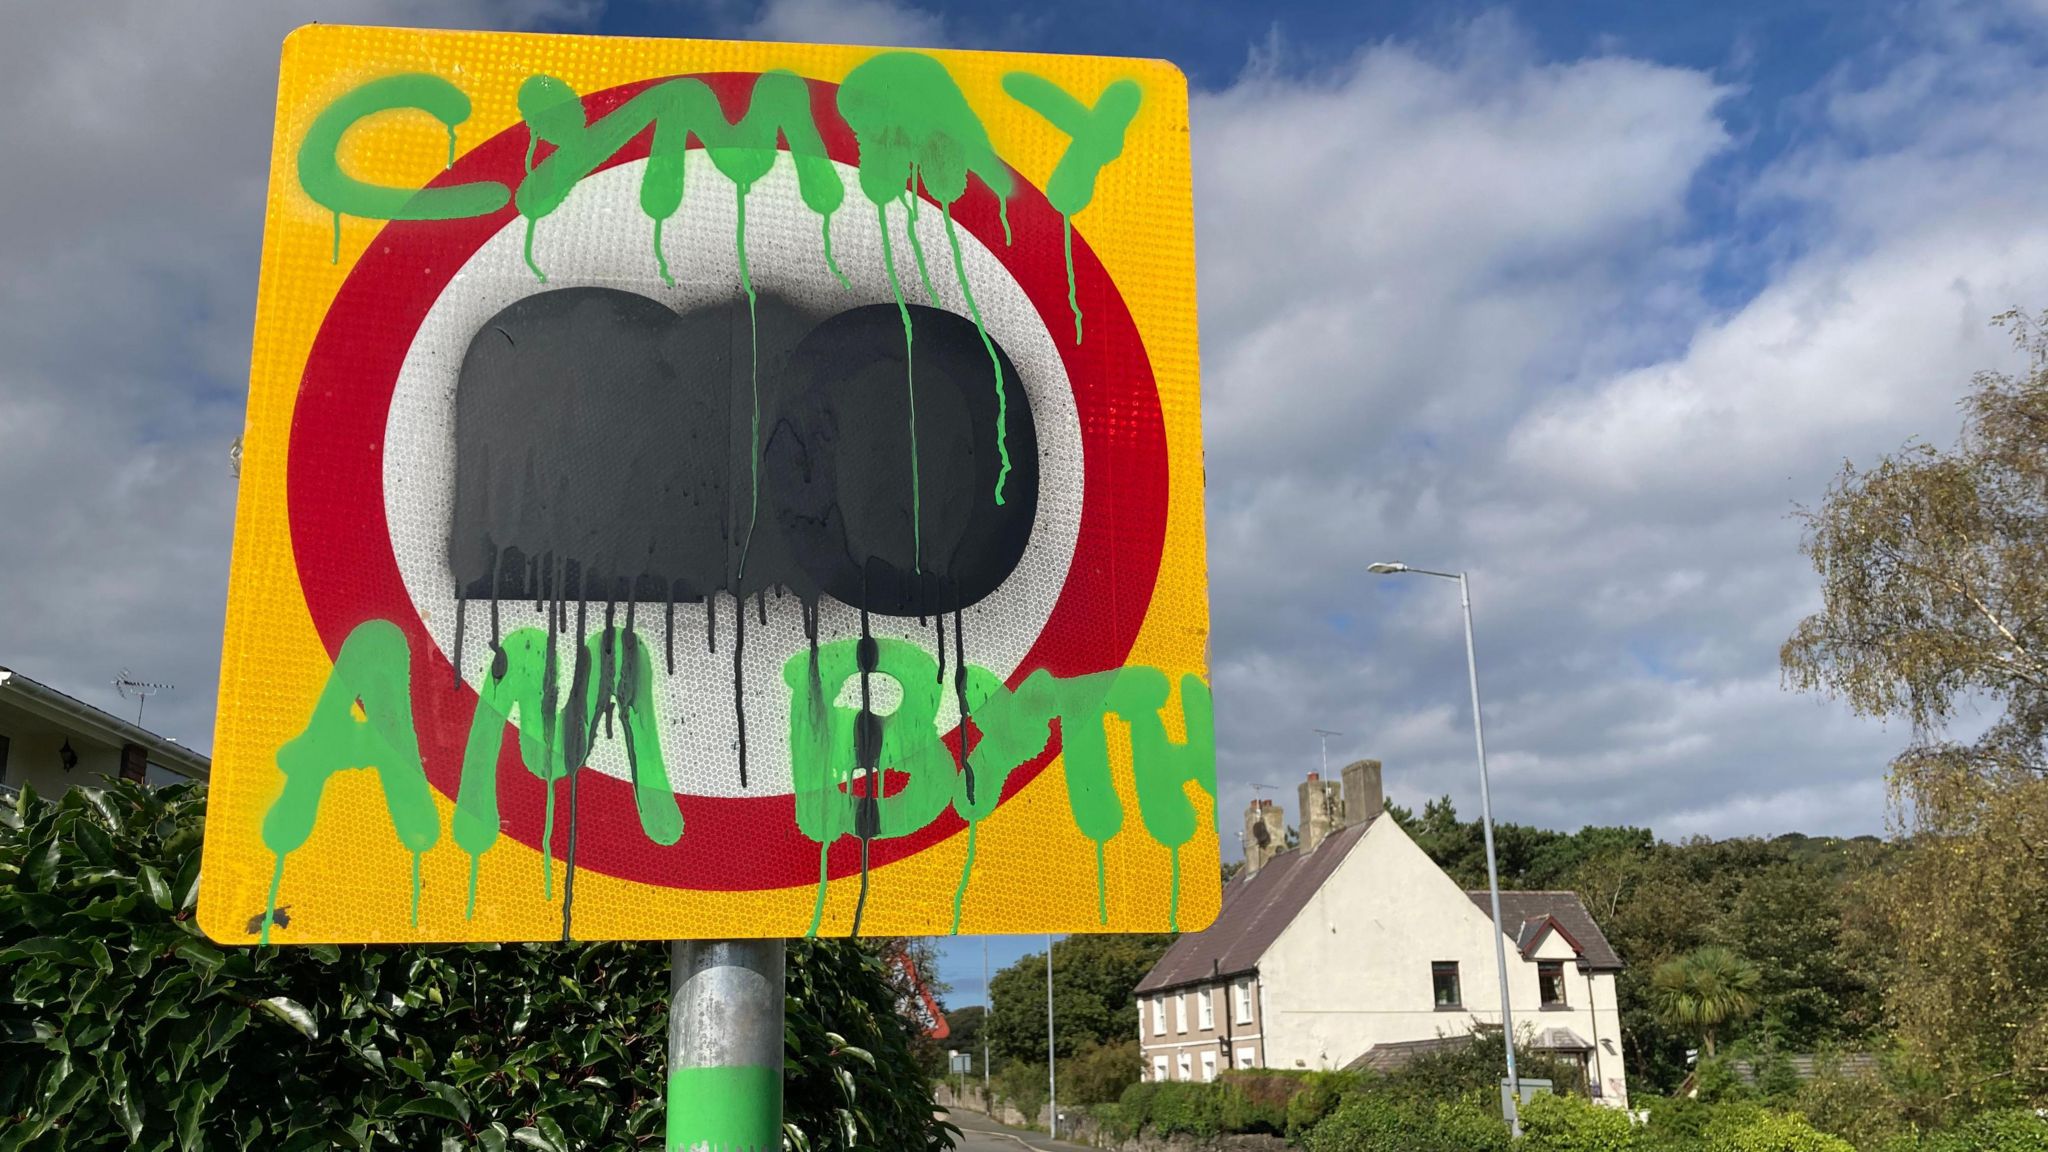 A 20mph sign which has been defaced with graffiti 